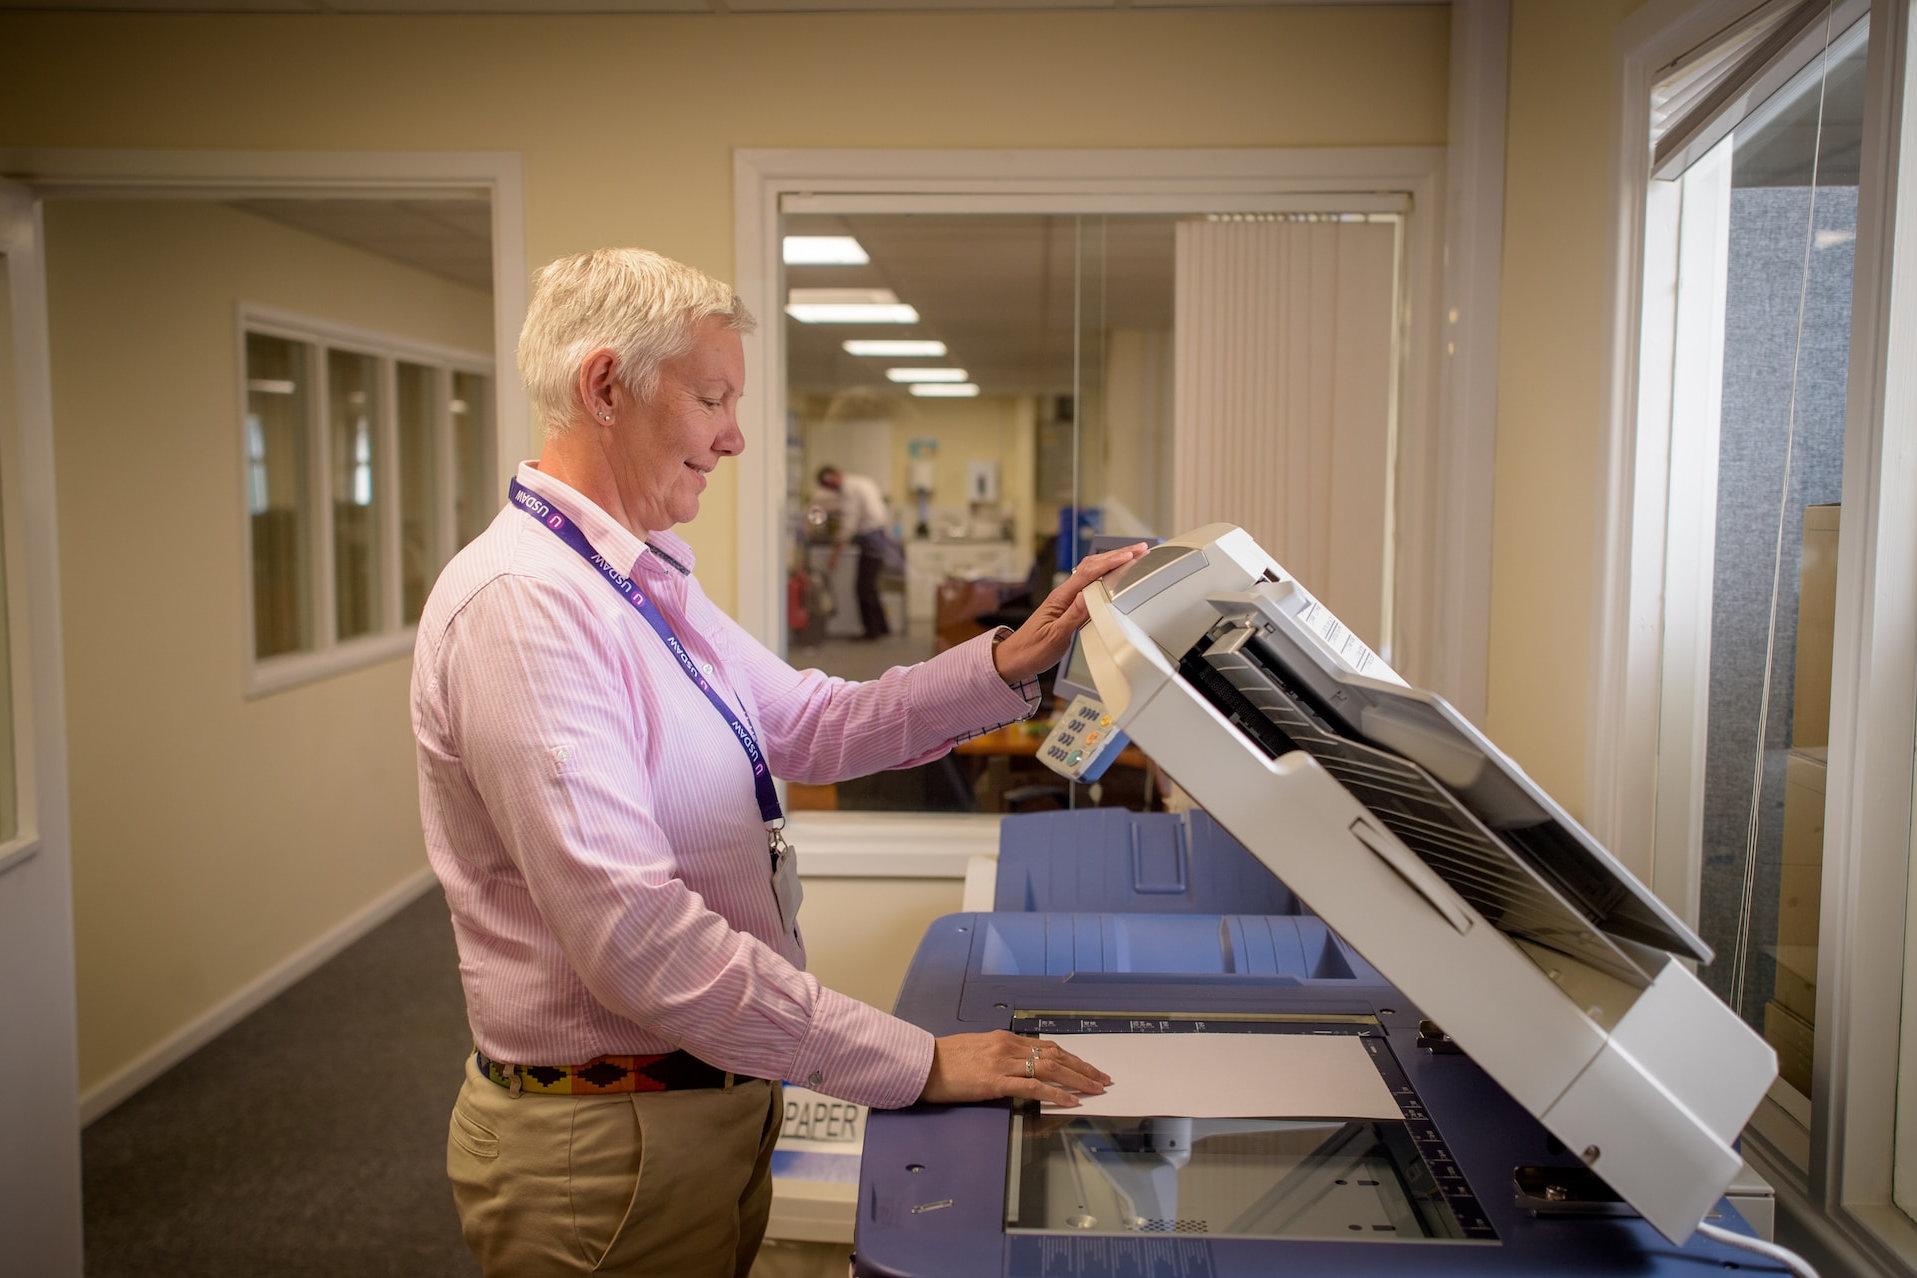 A person holds the lid and places a document in a large office copier.